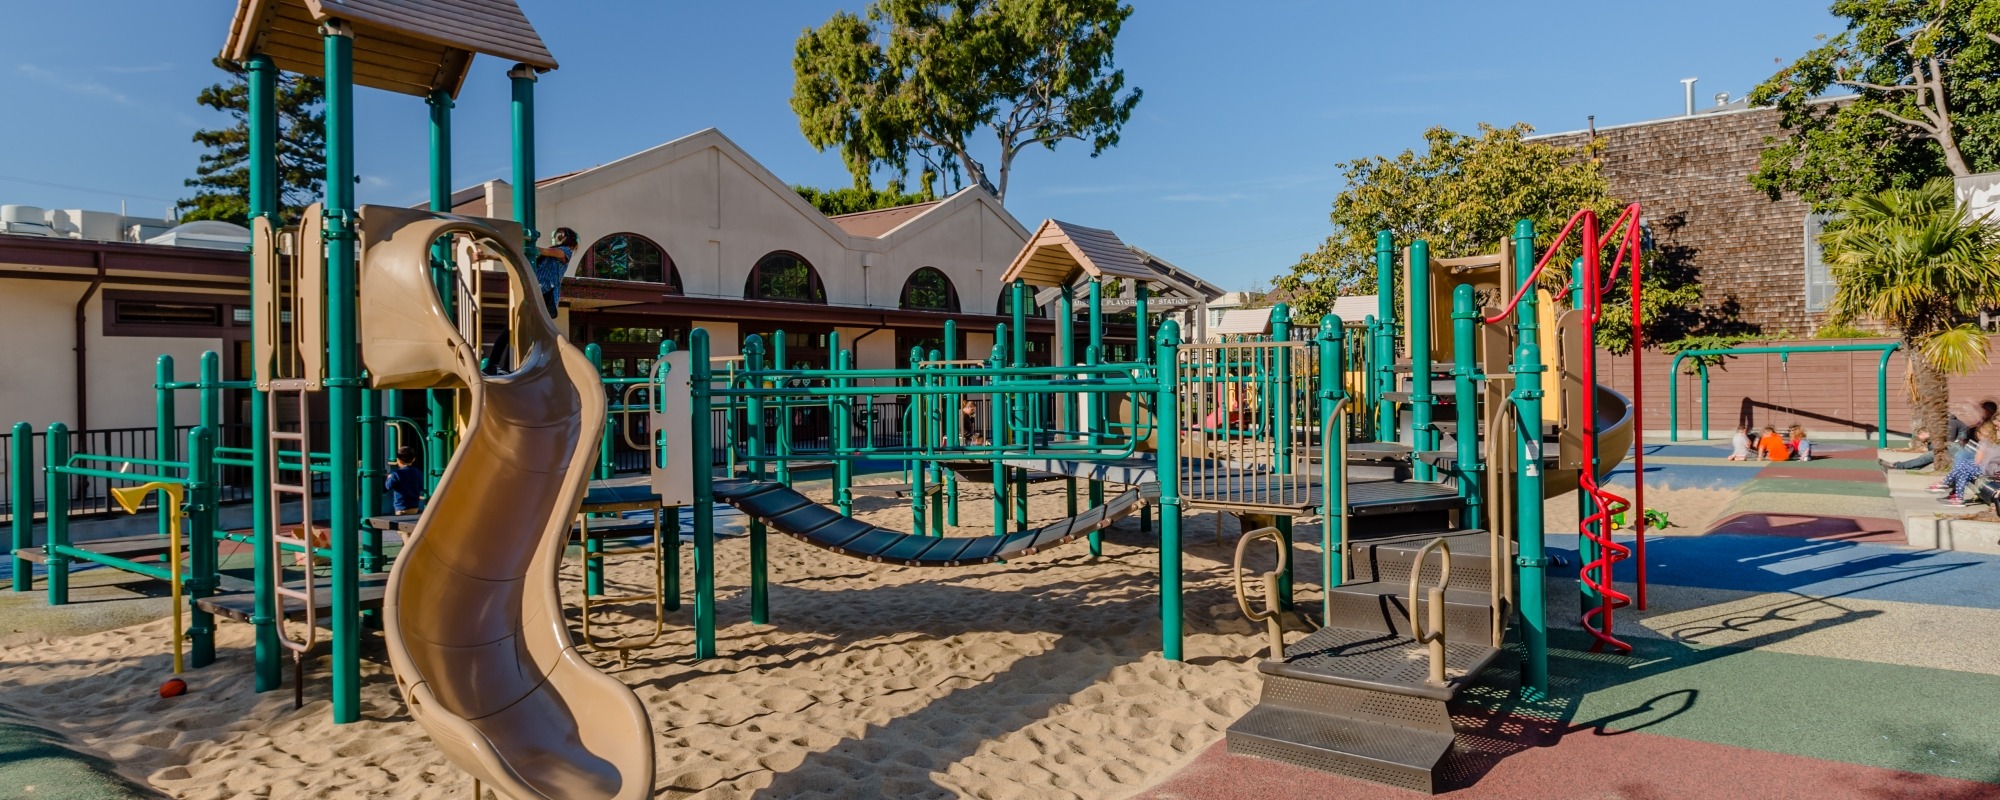 Mission Clubhouse, Pool and Playground